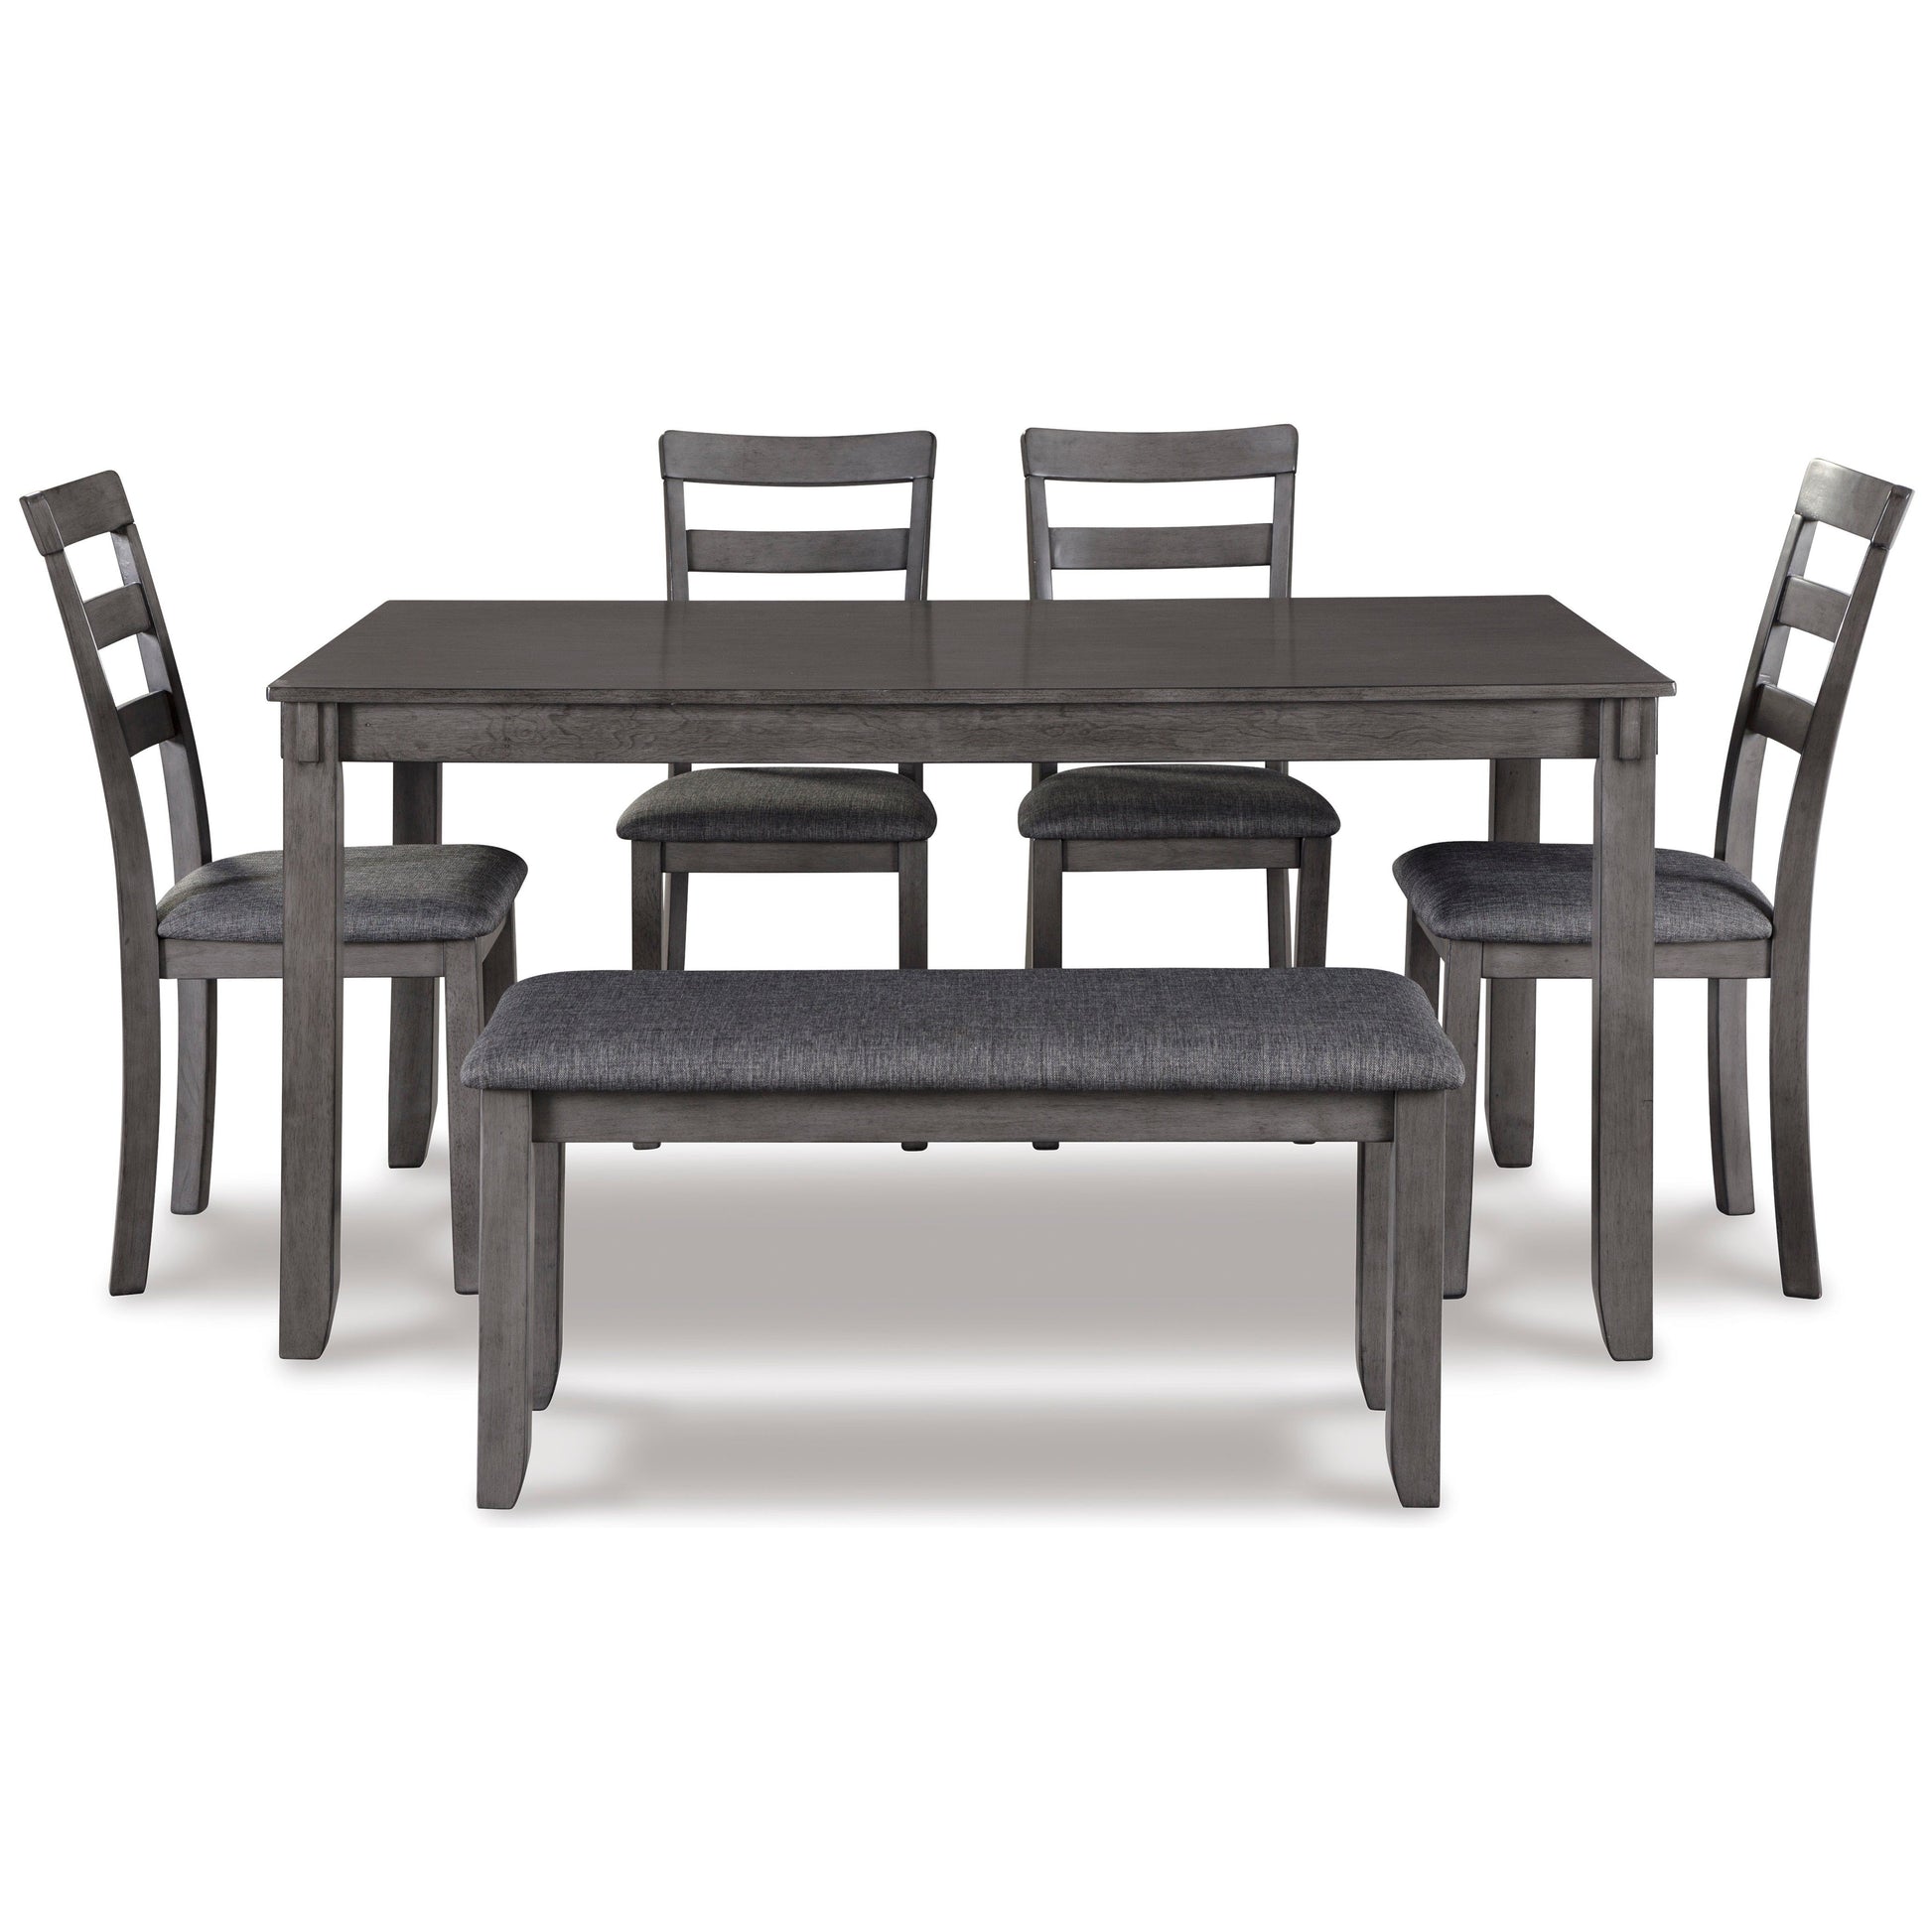 Fiona Dining set with 4 Collins Dining Chairs (Grey), Mid in Mod